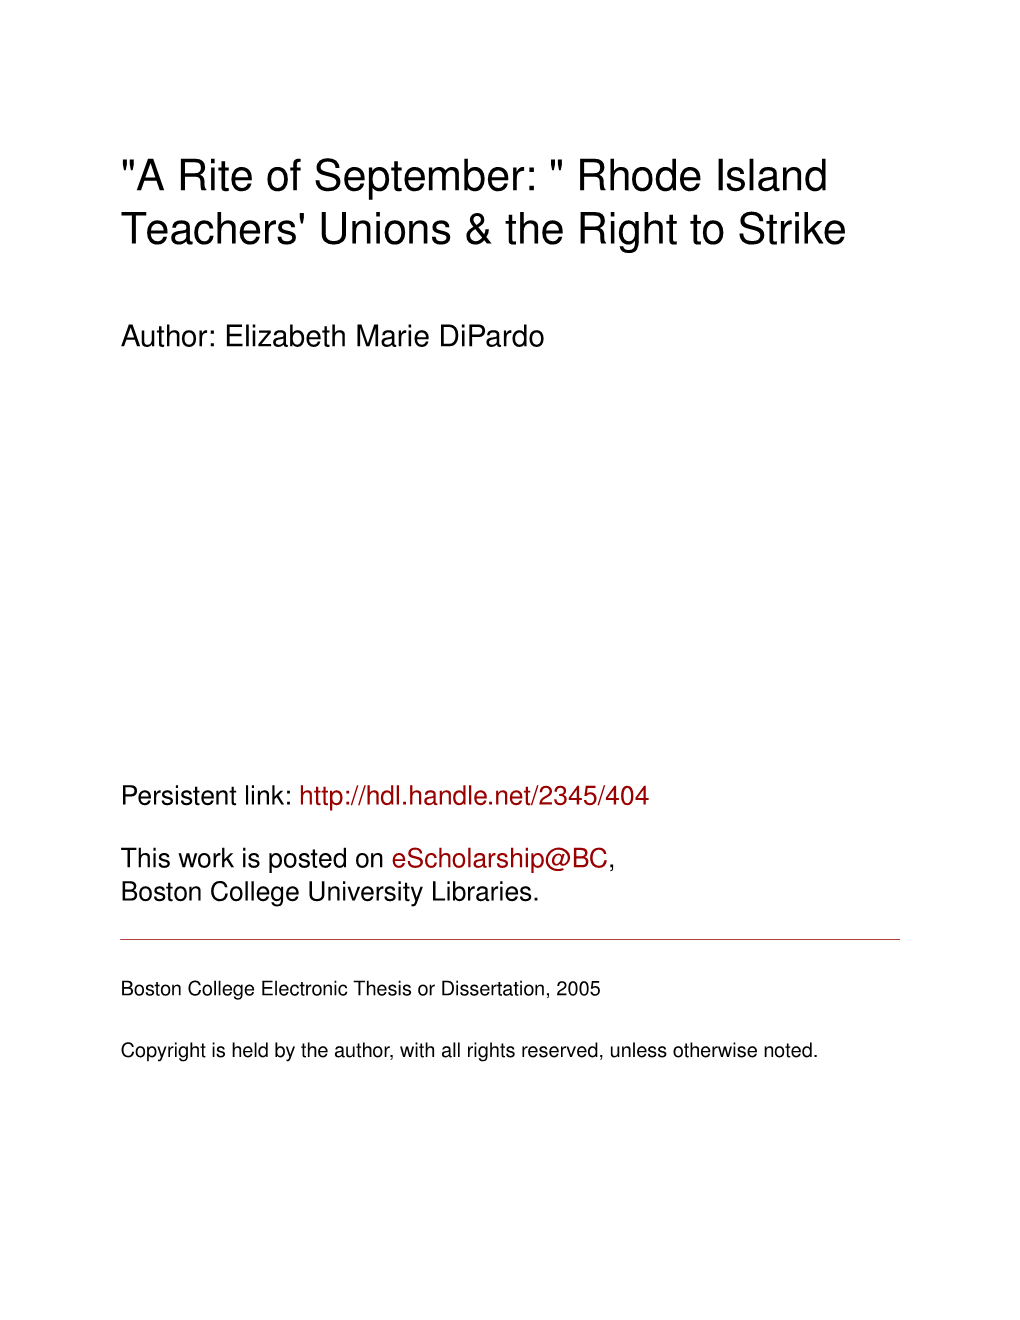 "A Rite of September: " Rhode Island Teachers' Unions & the Right to Strike